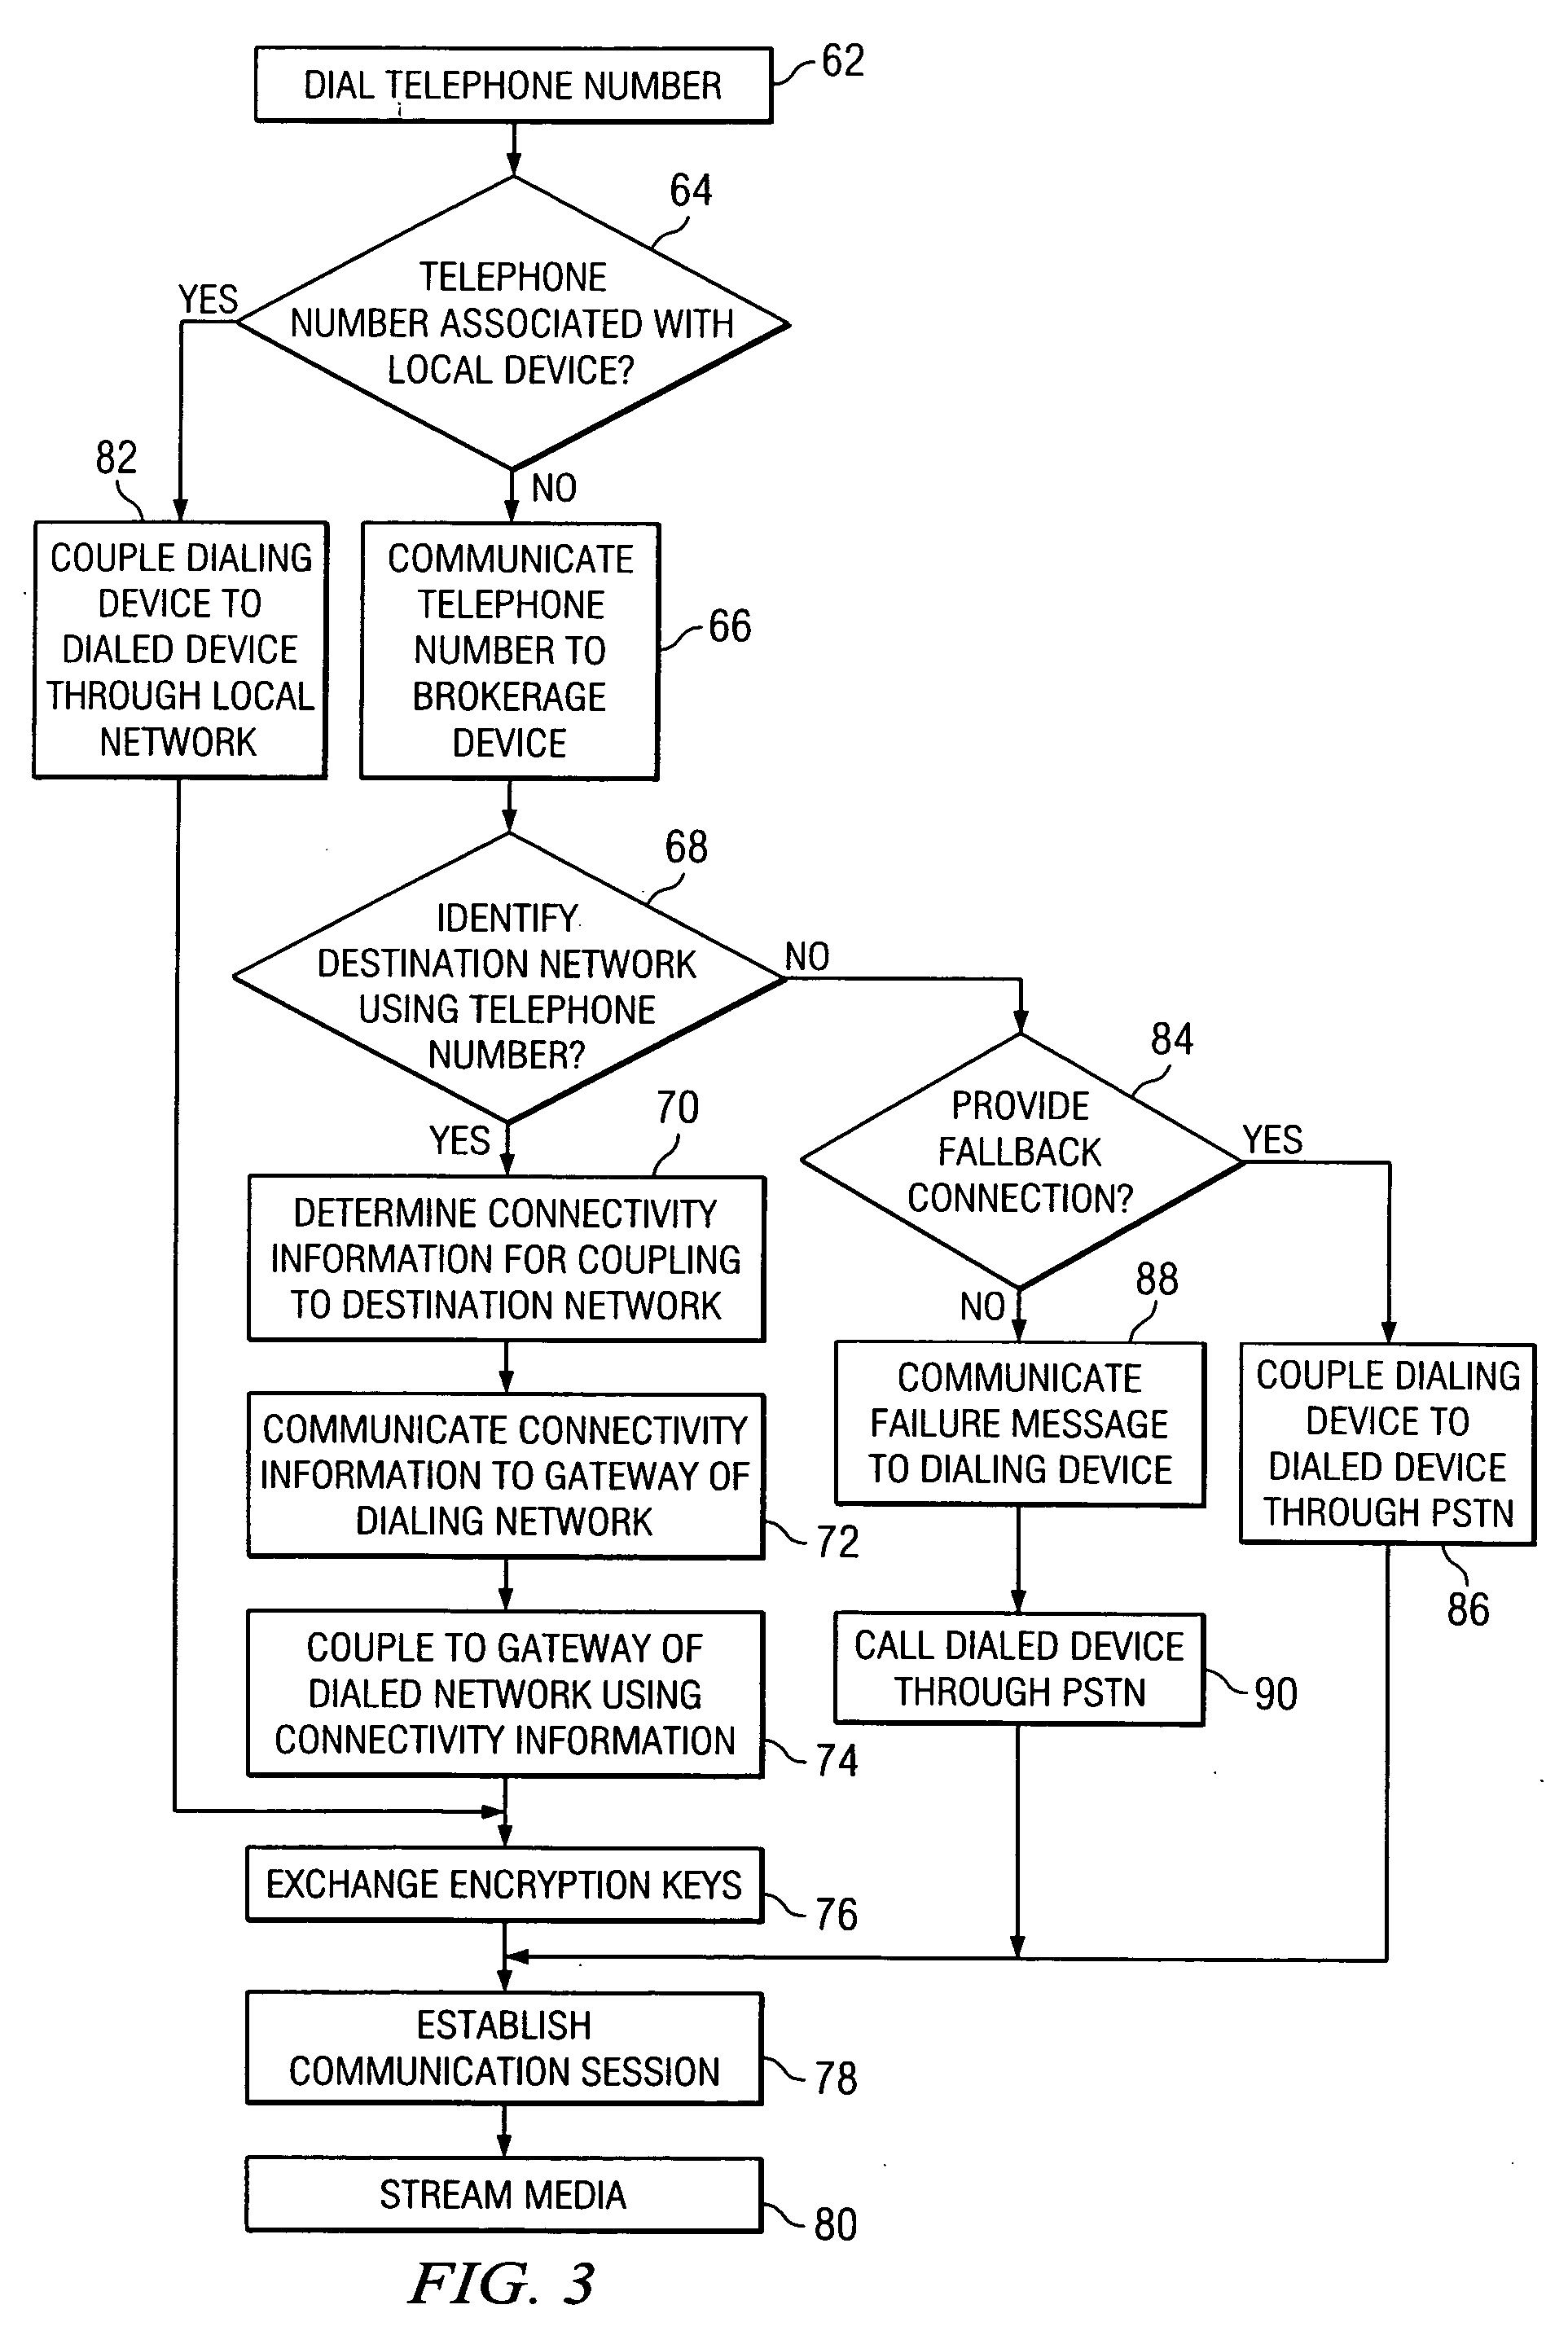 Inter-enterprise telephony using a central brokerage device